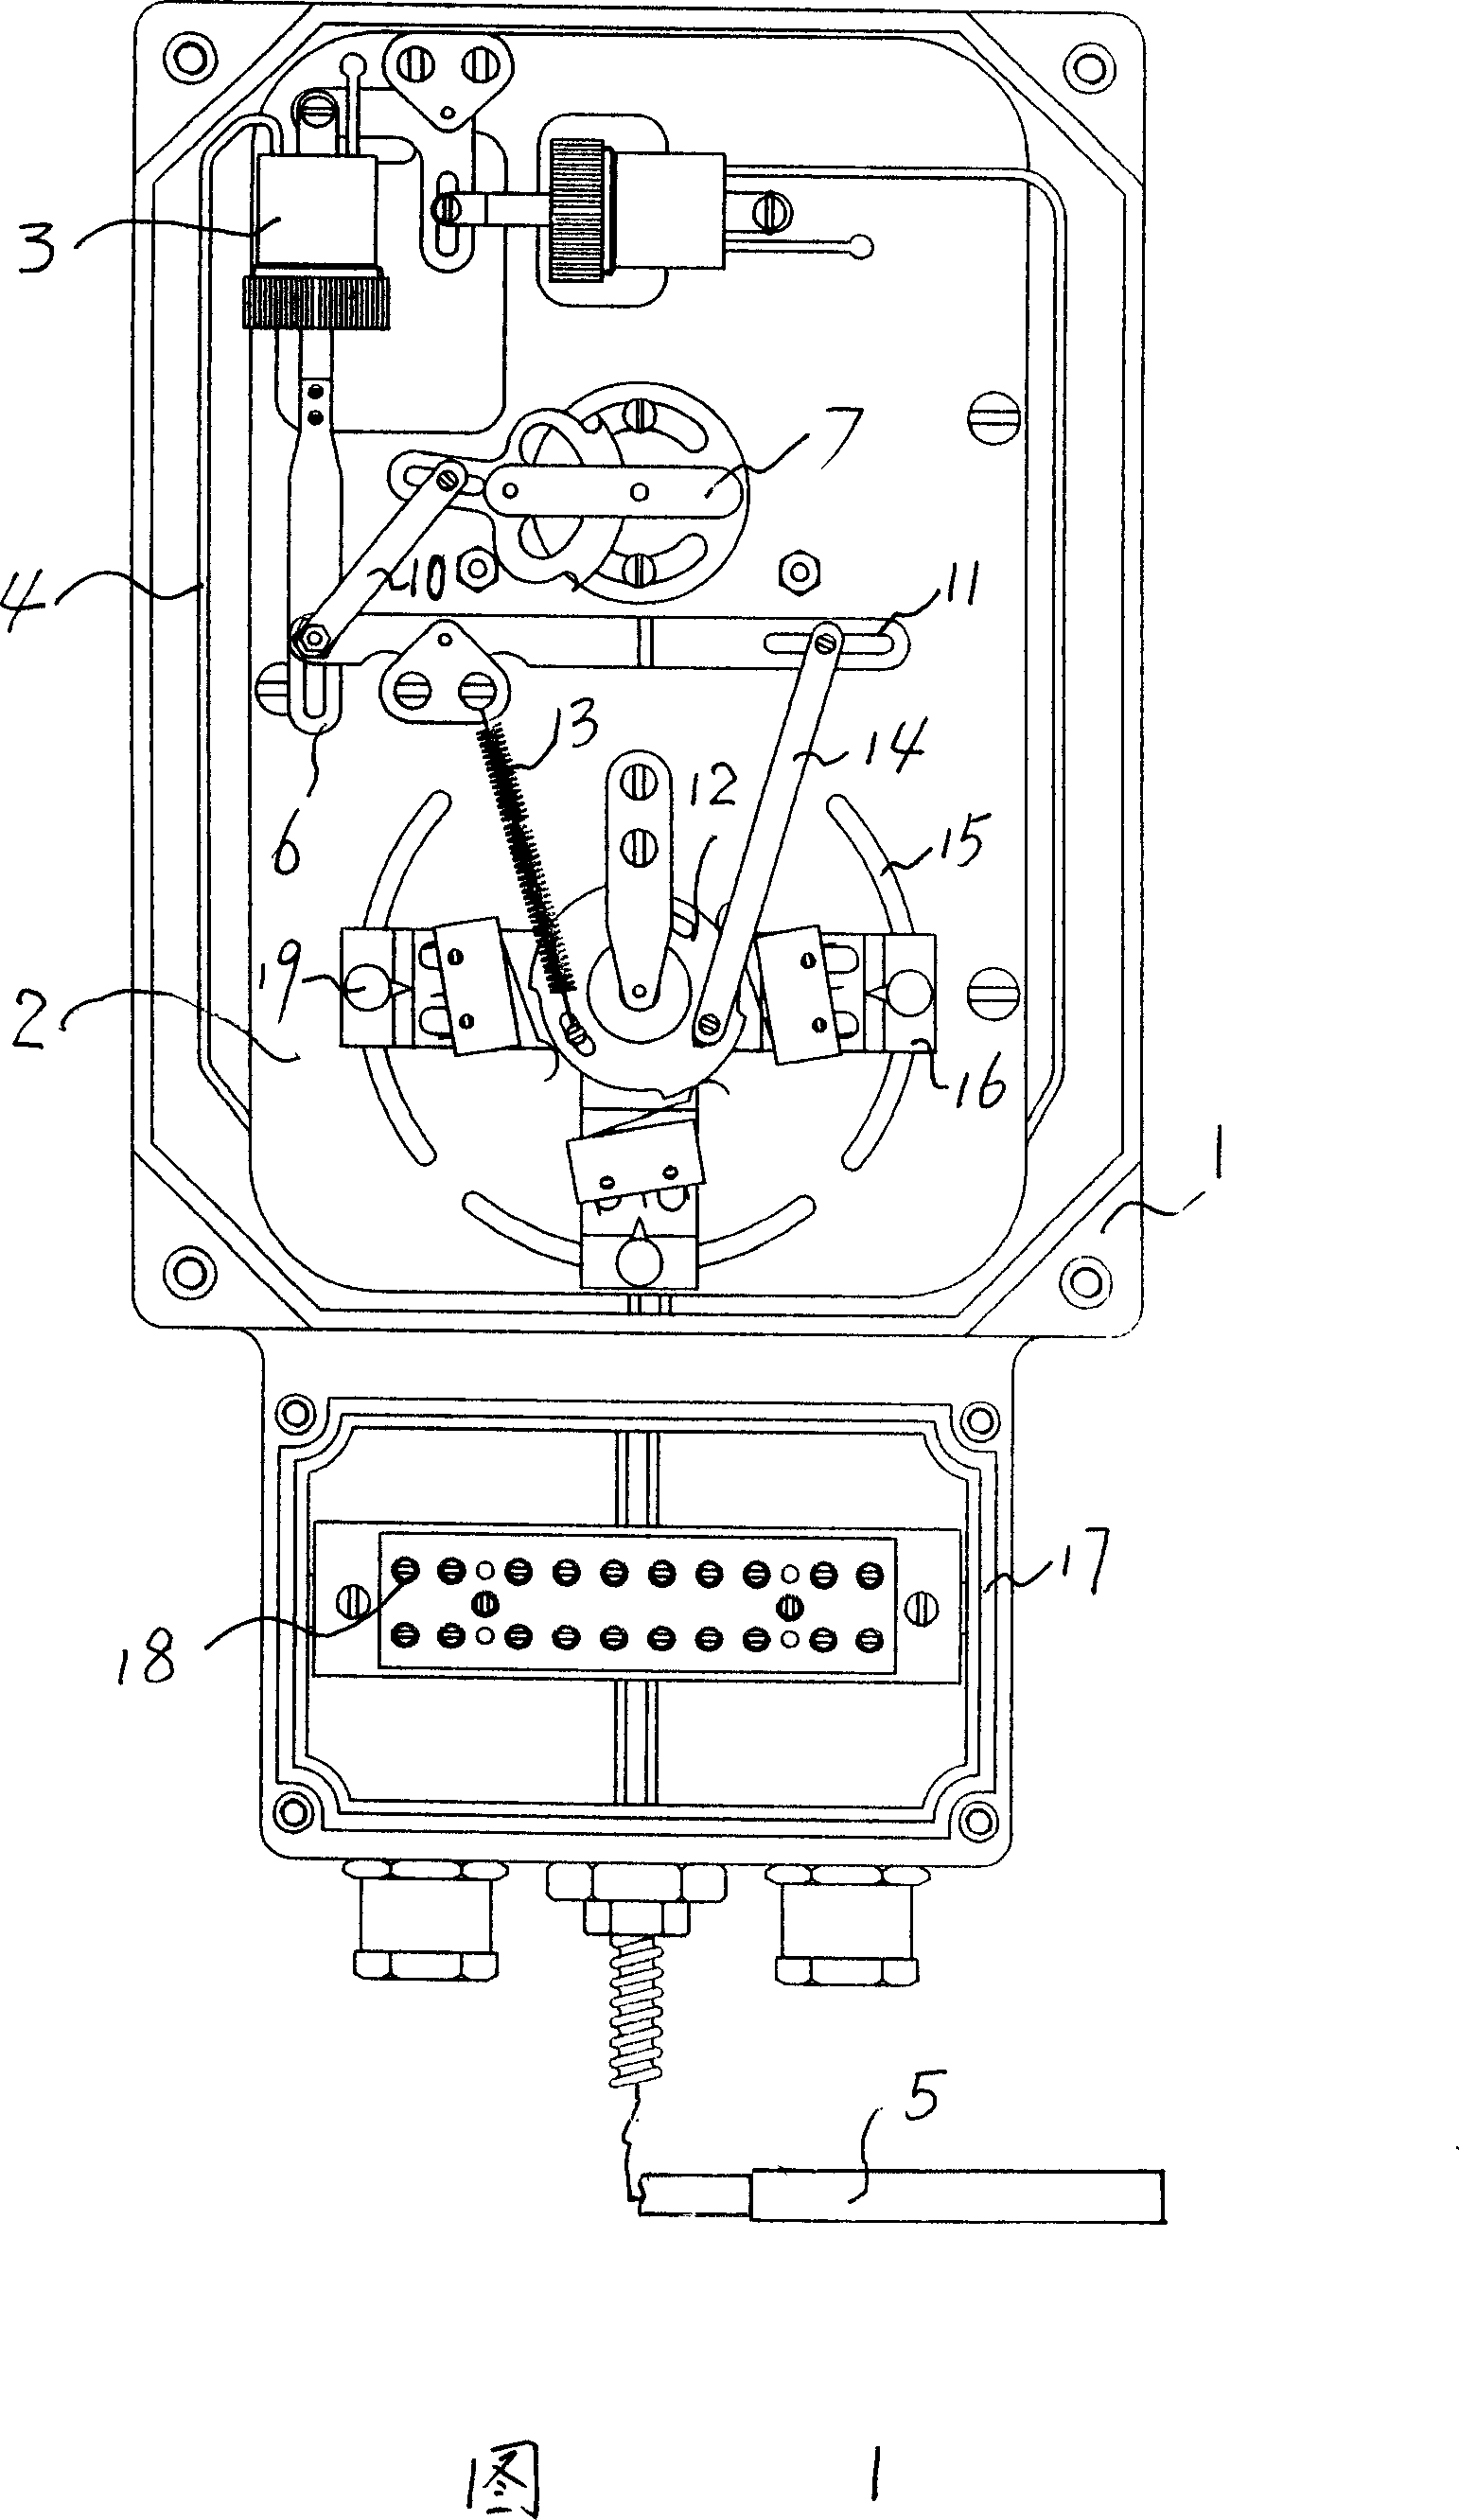 Temperature indicating controller for use in transformer